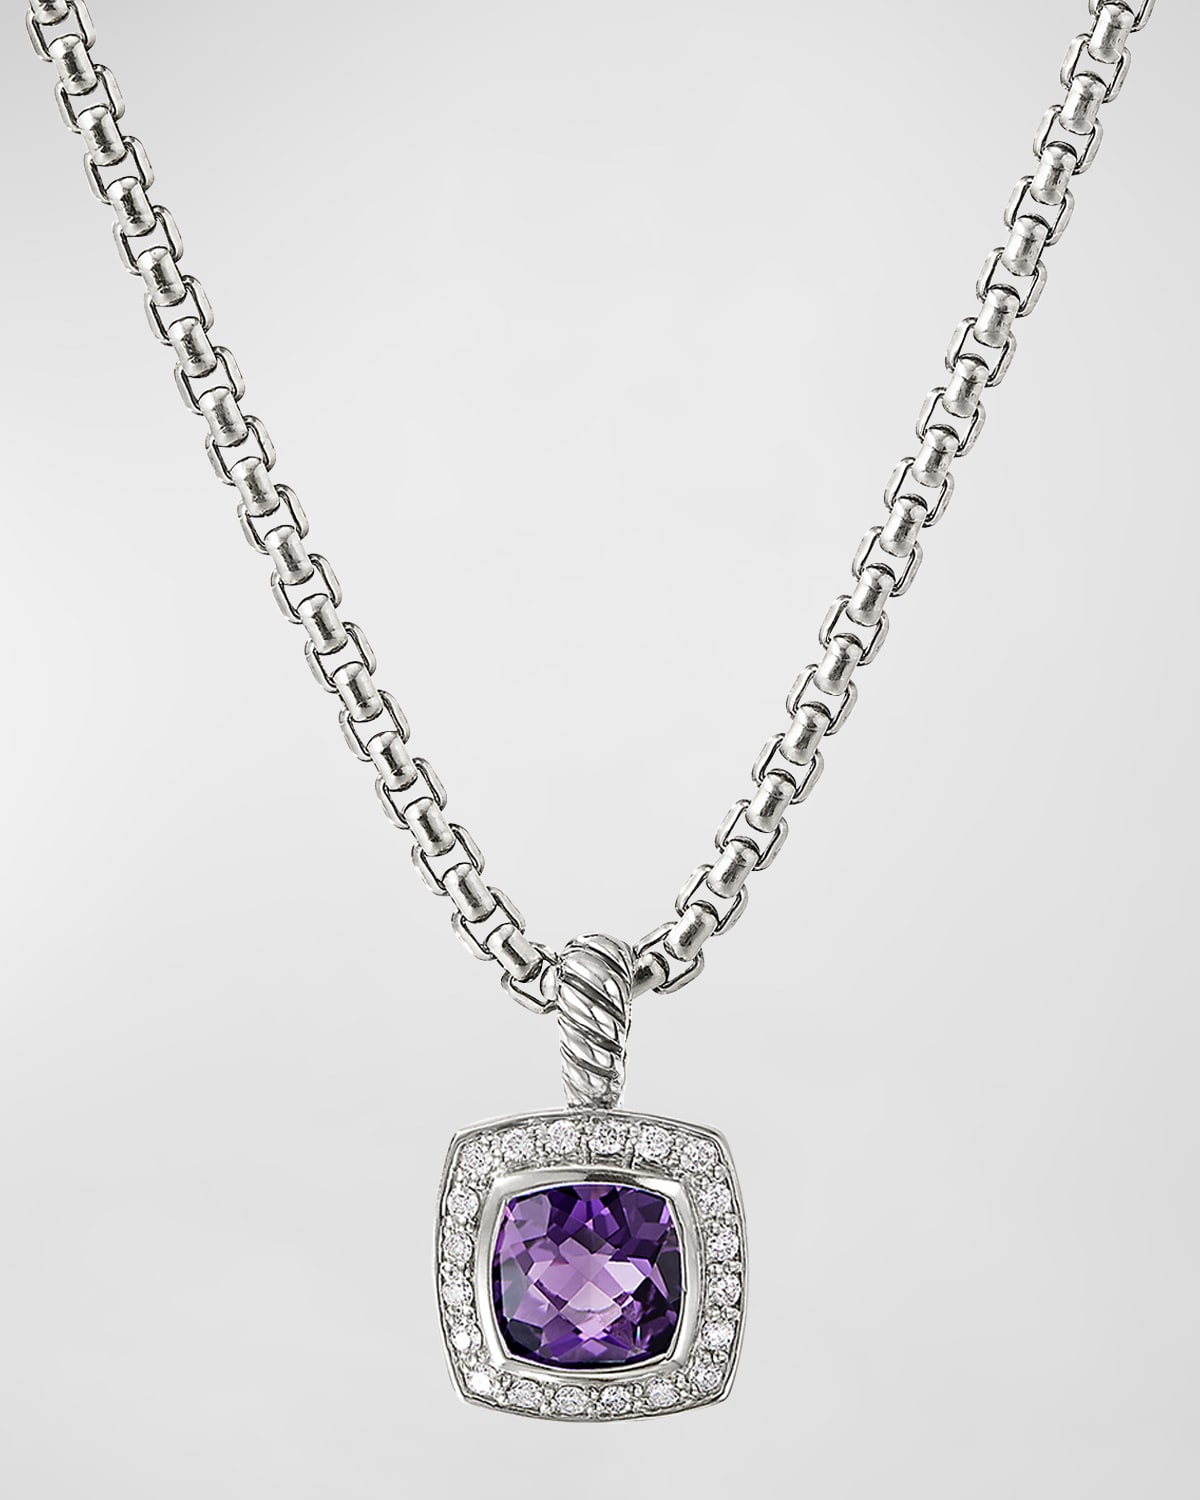 Petite Albion Necklace with Gemstone and Diamonds